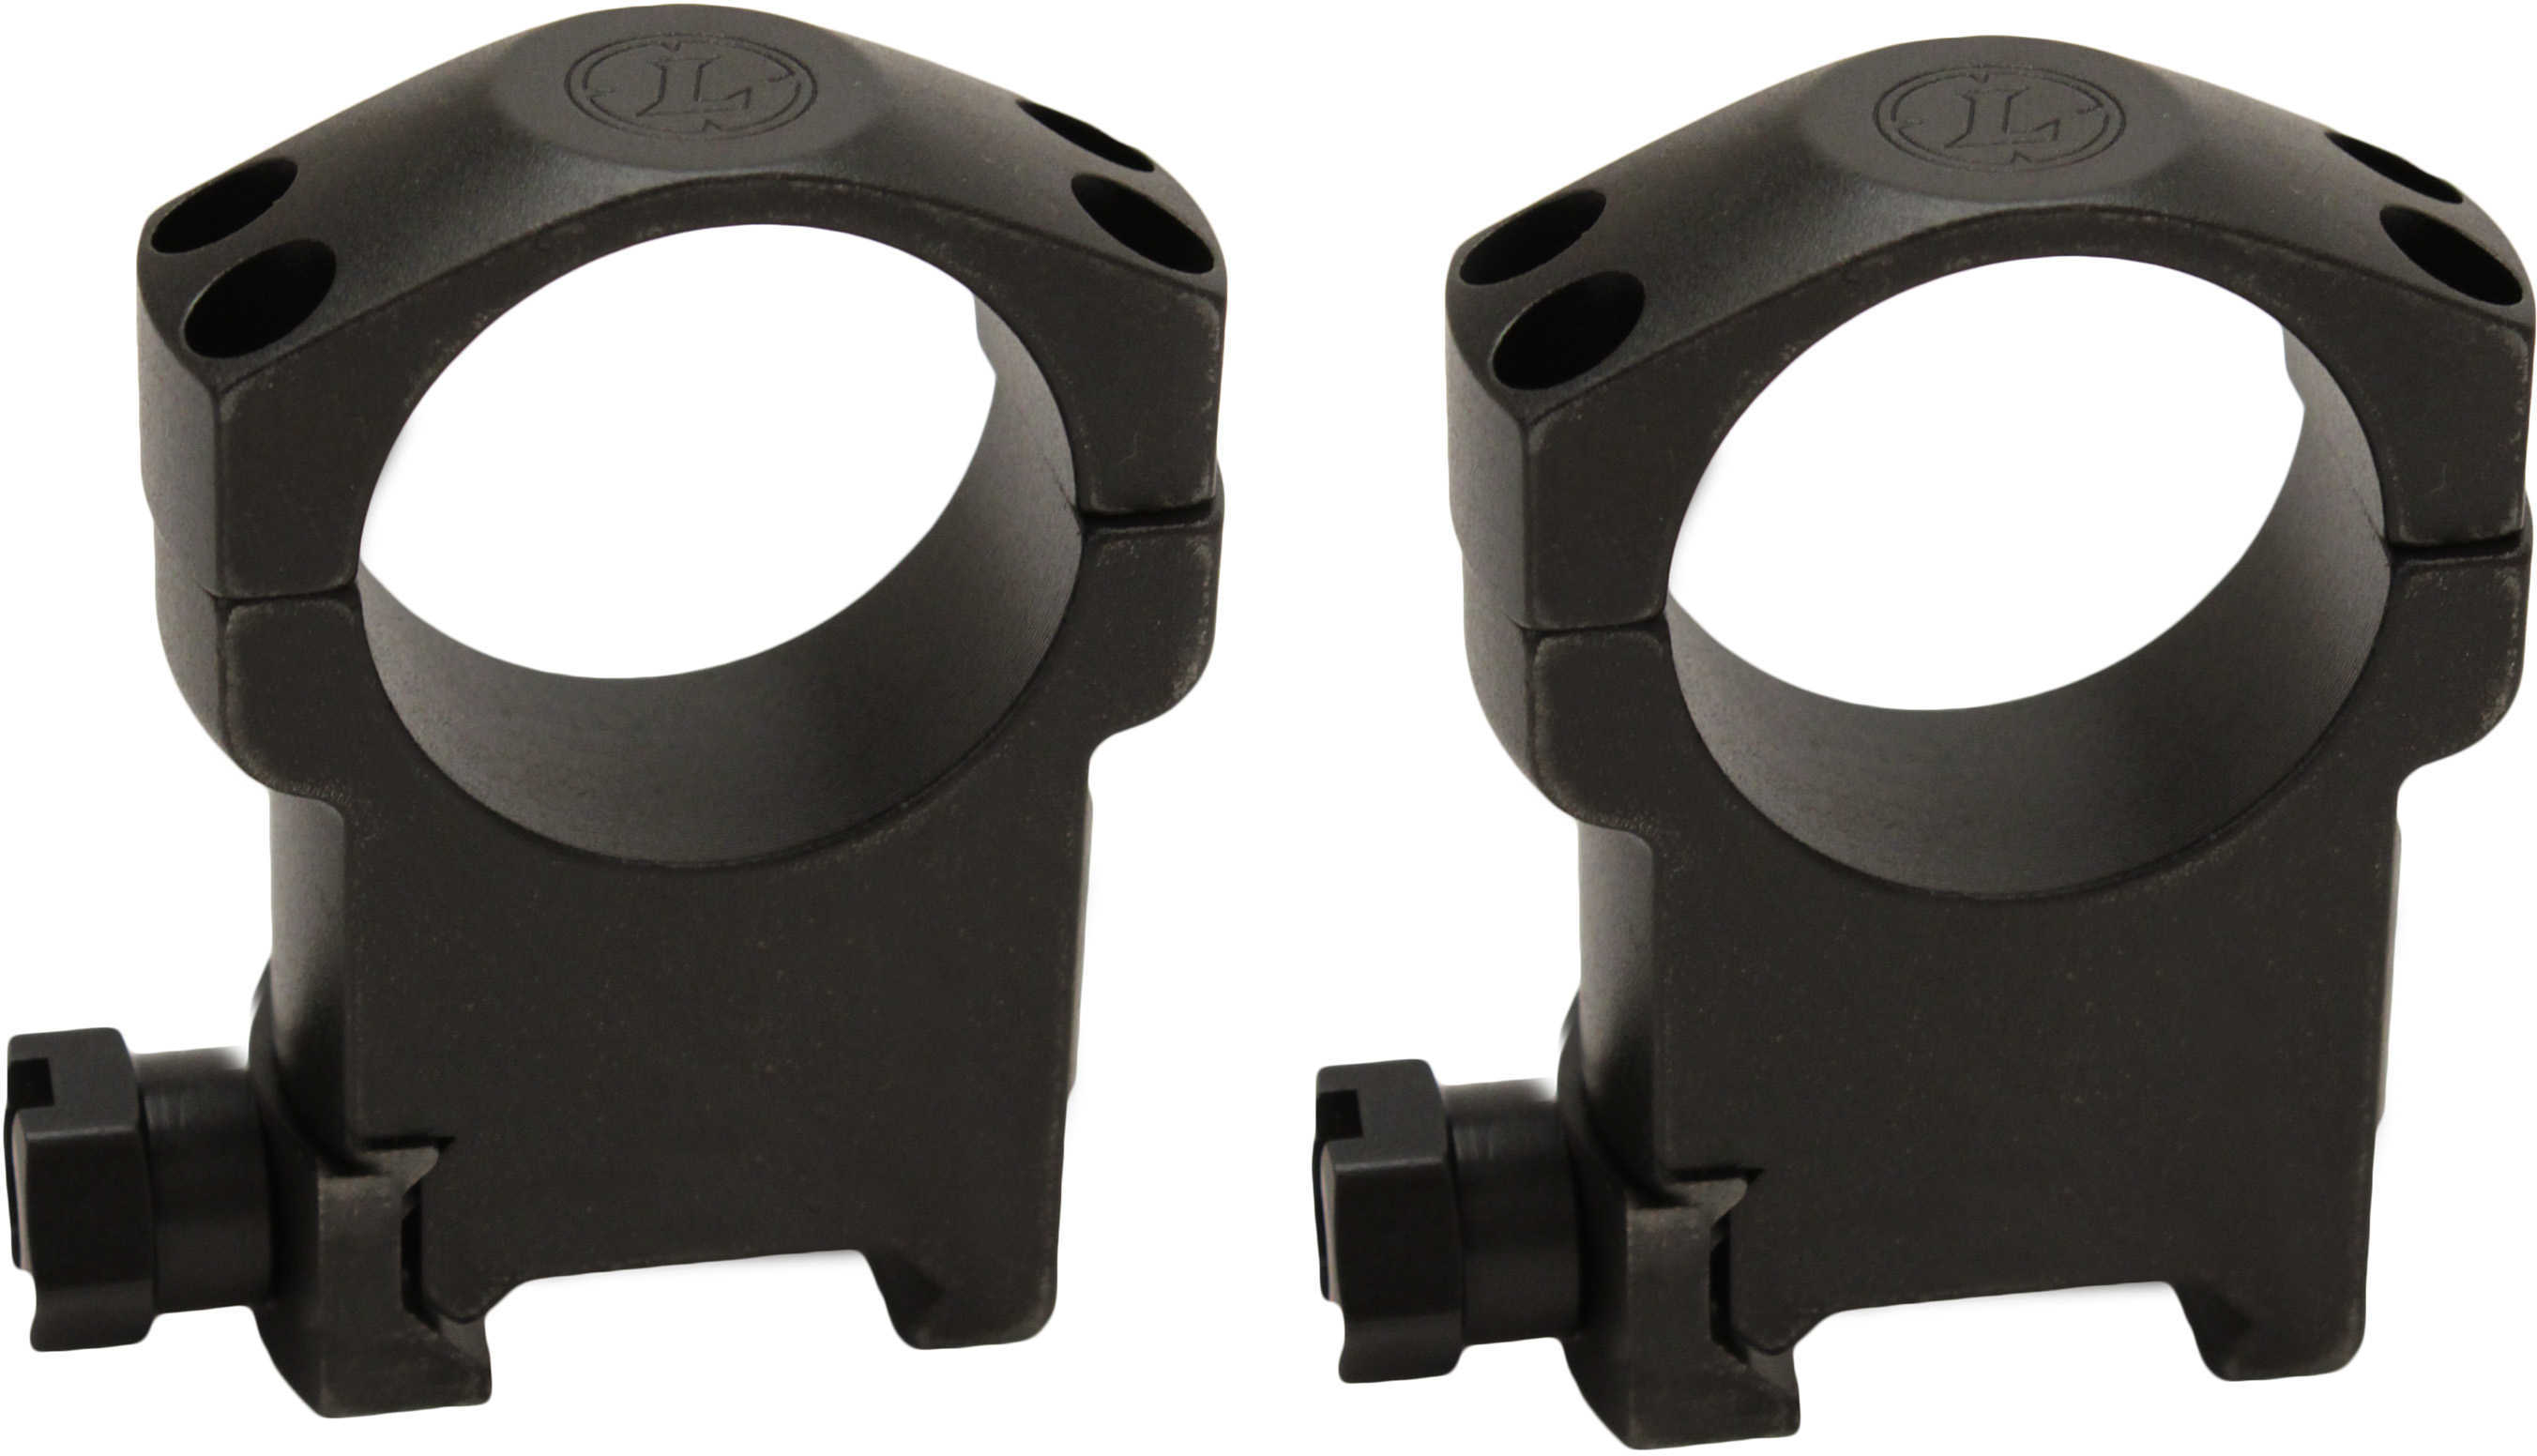 Leupold Super High Rings With Matte Black Finish Md: 60750